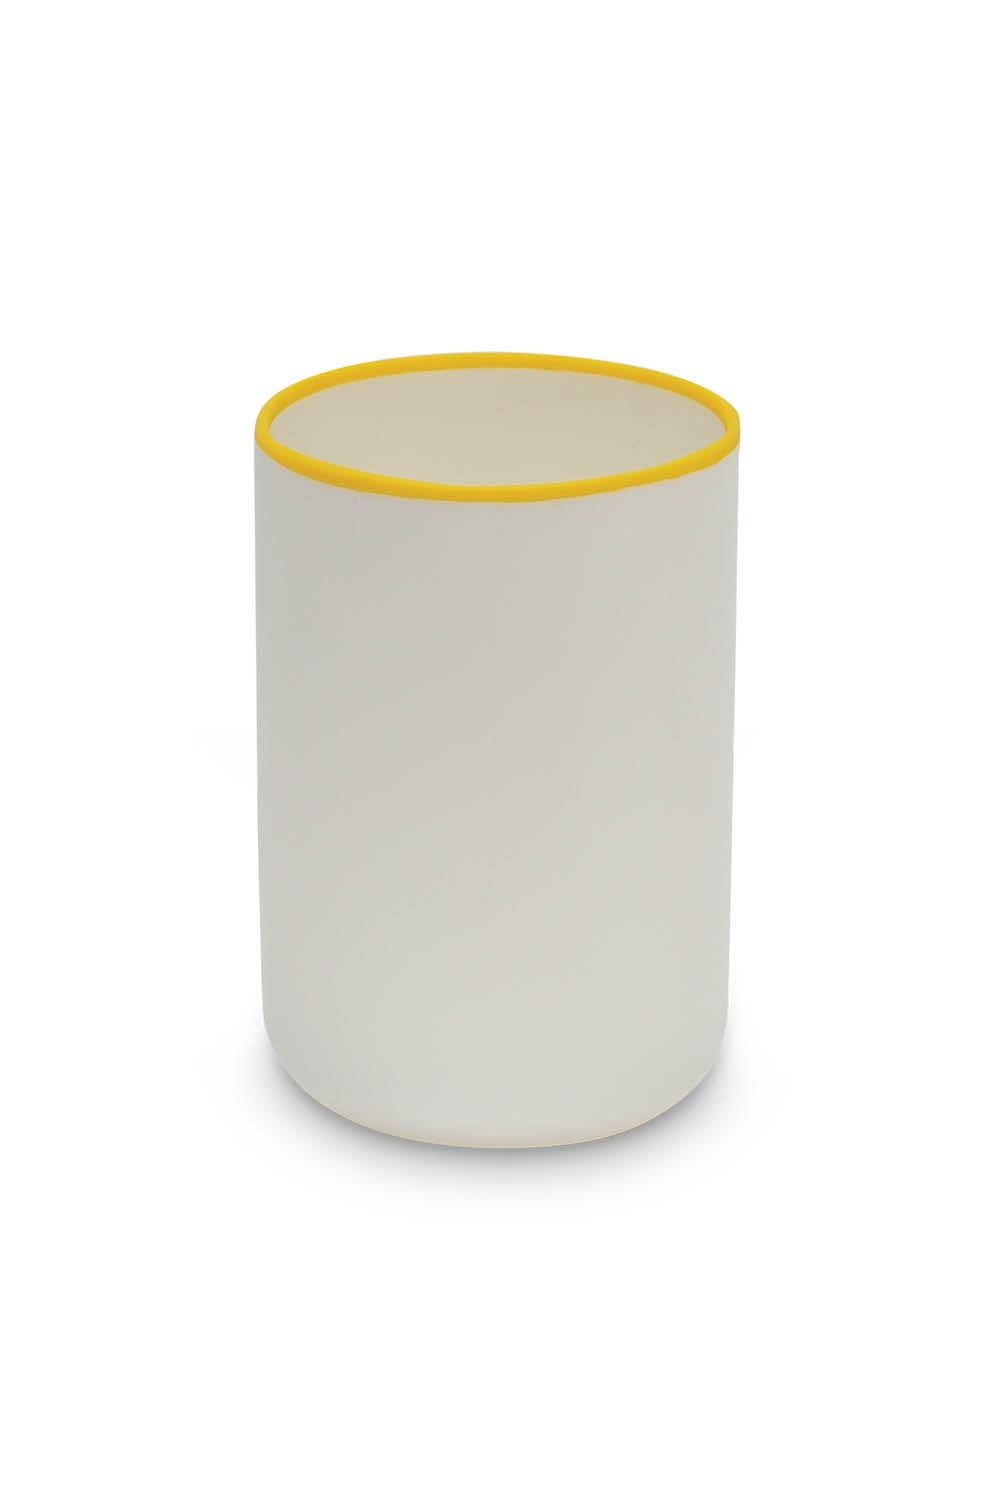 LIGNE Champagne Cooler in White With Sunshine Yellow Rim